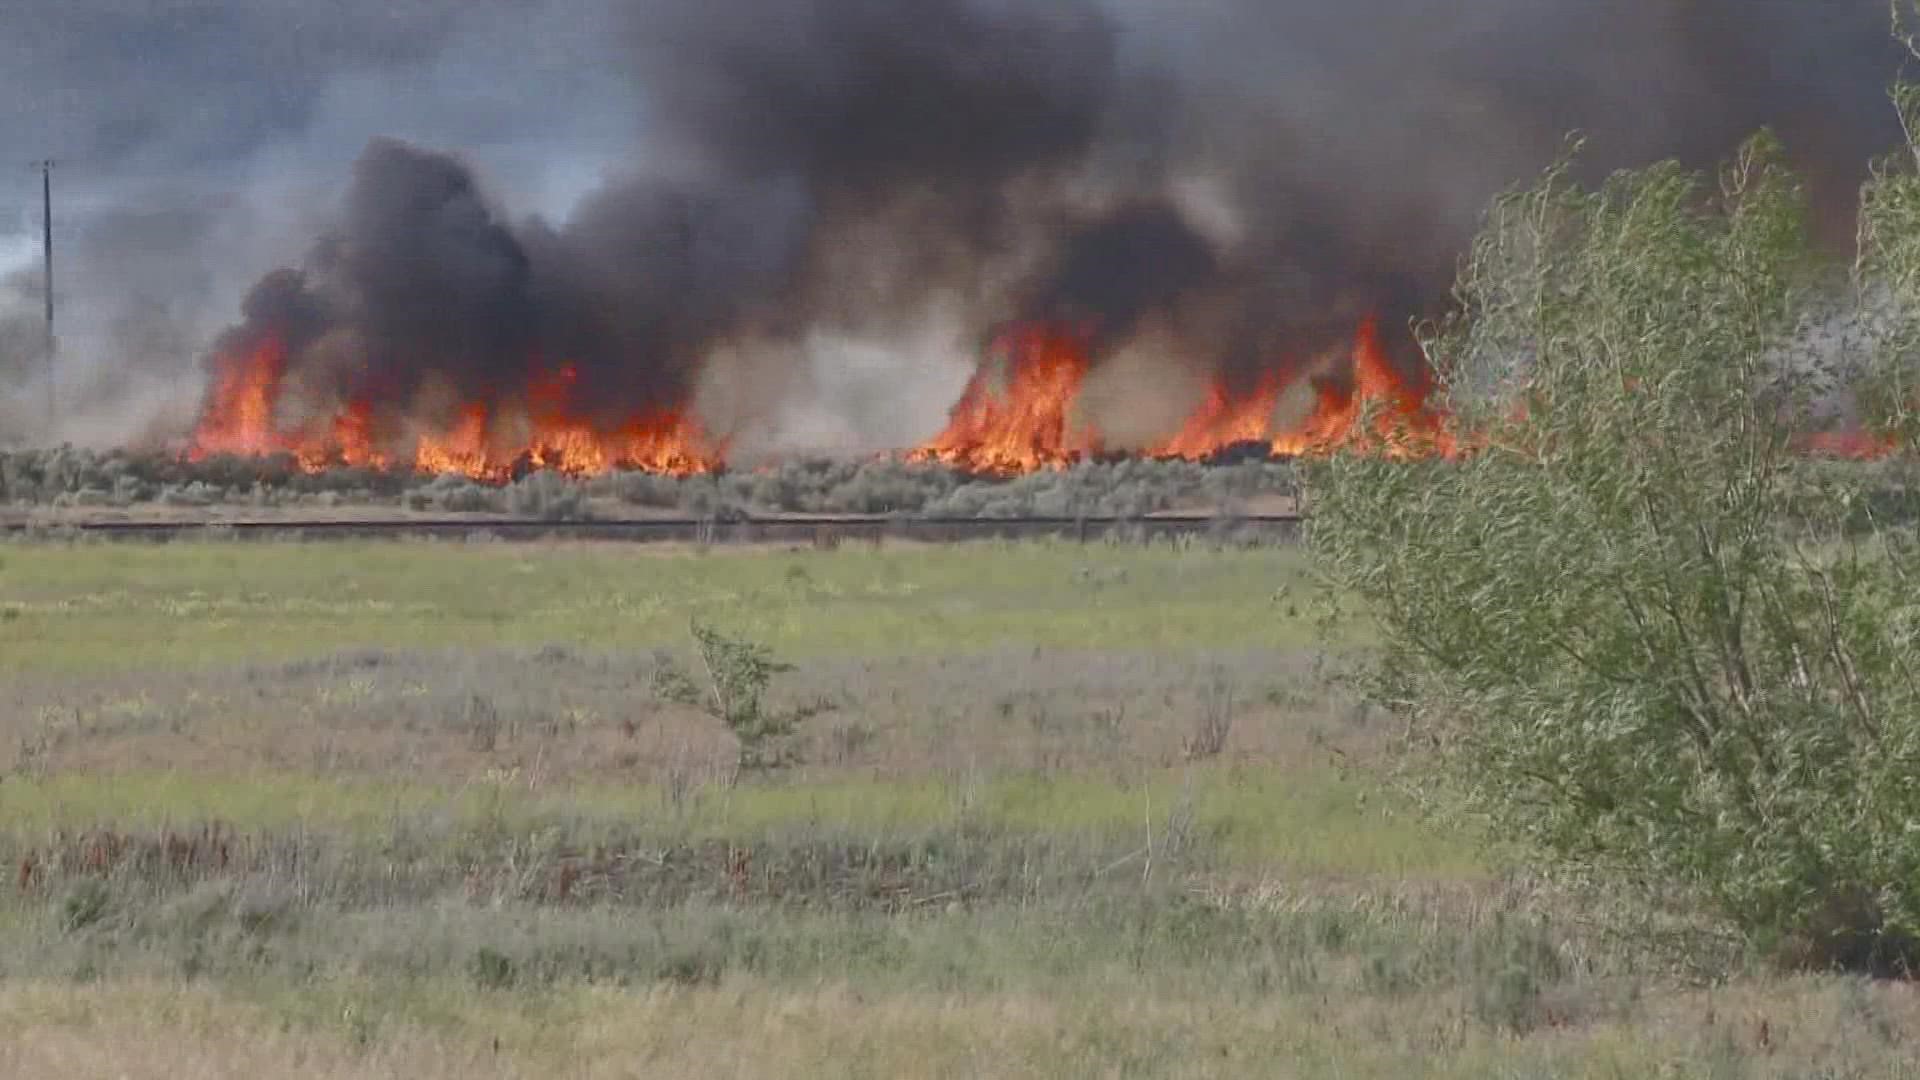 At this time, there are 50 homes being threatened by the fire.